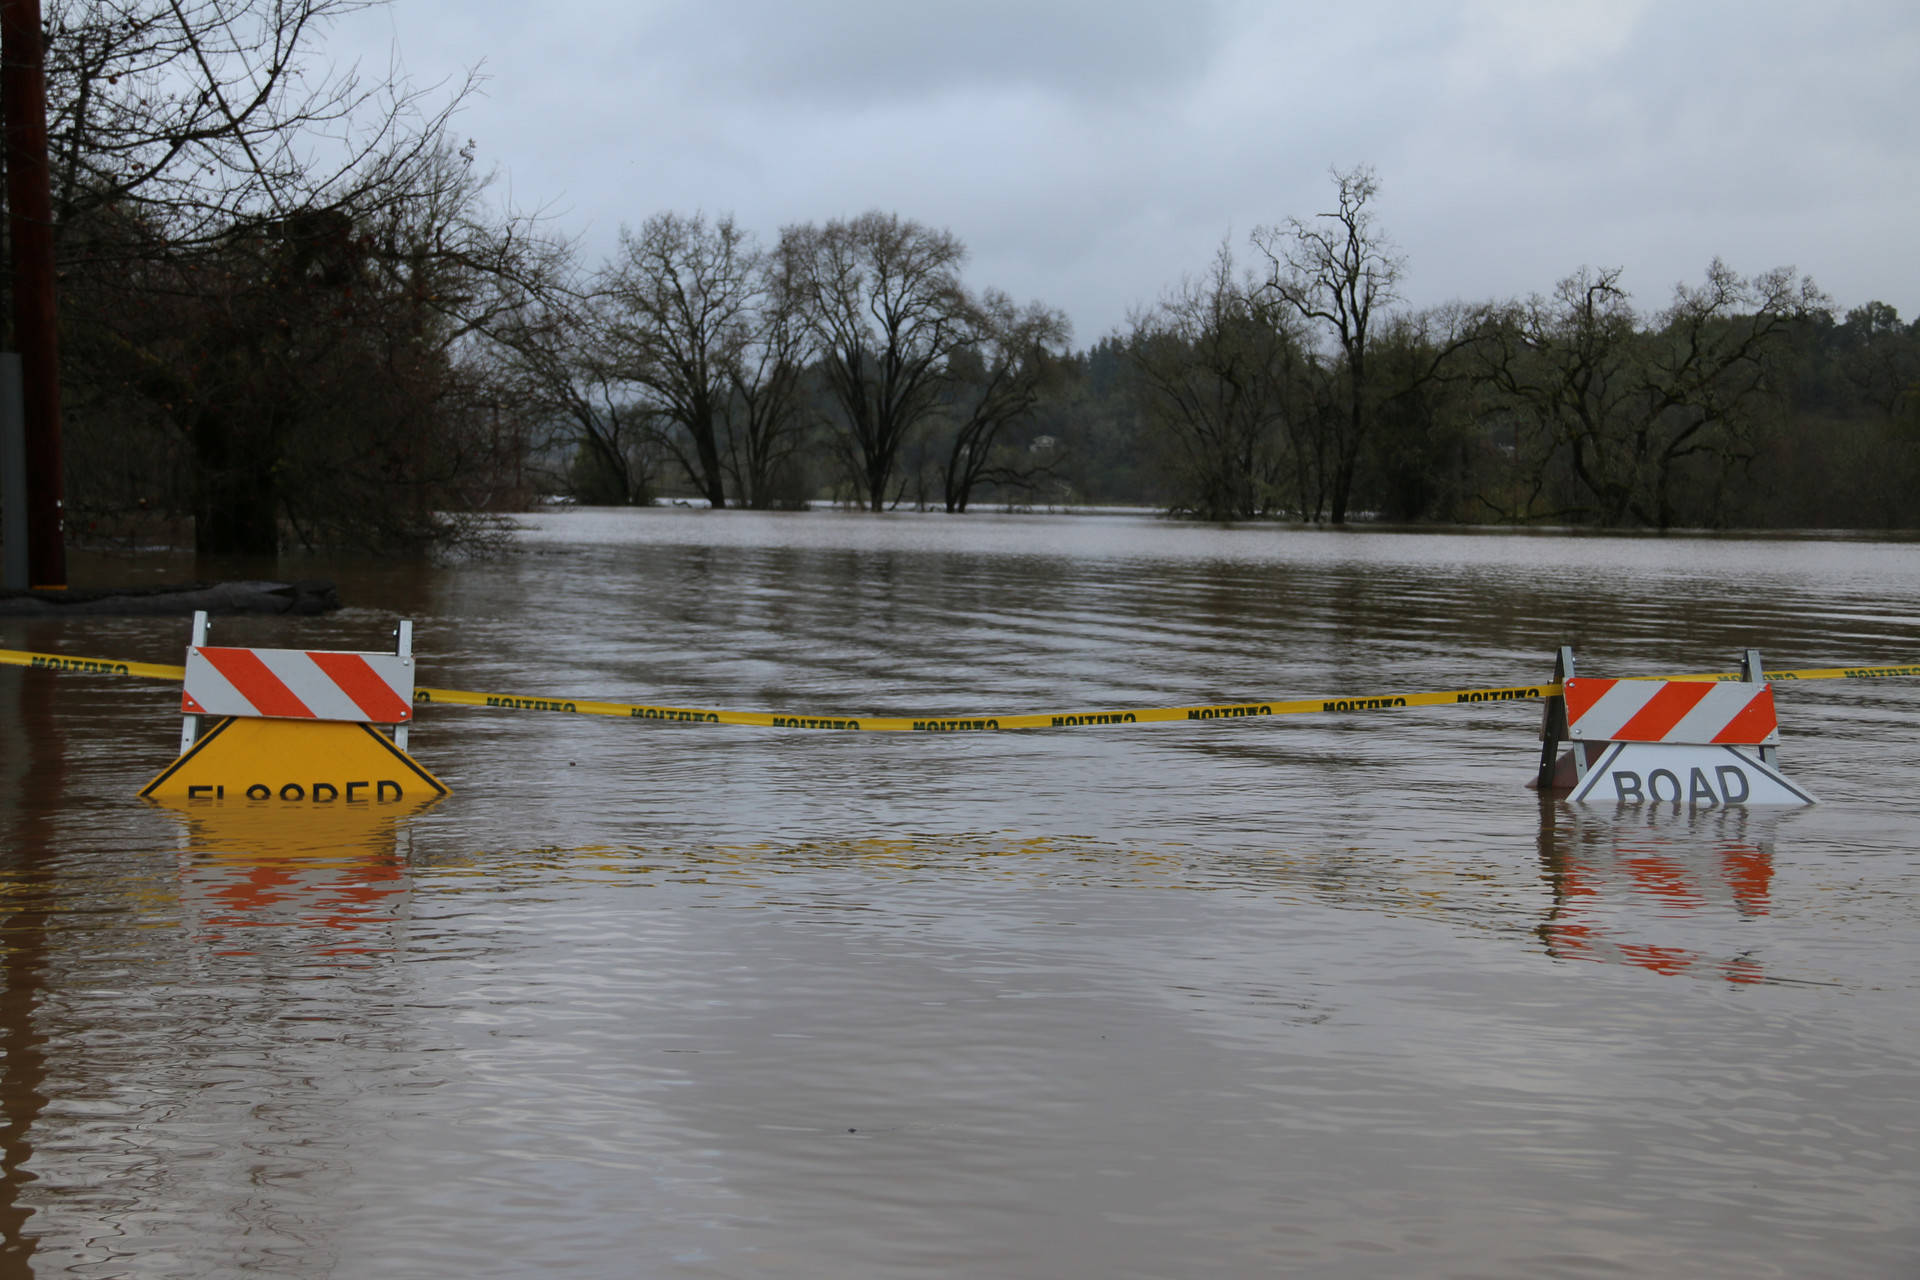 Wohler Road flooded and closed at River Road during Russian River flooding in Sonoma County on Feb. 27, 2019. Adam Grossberg/KQED